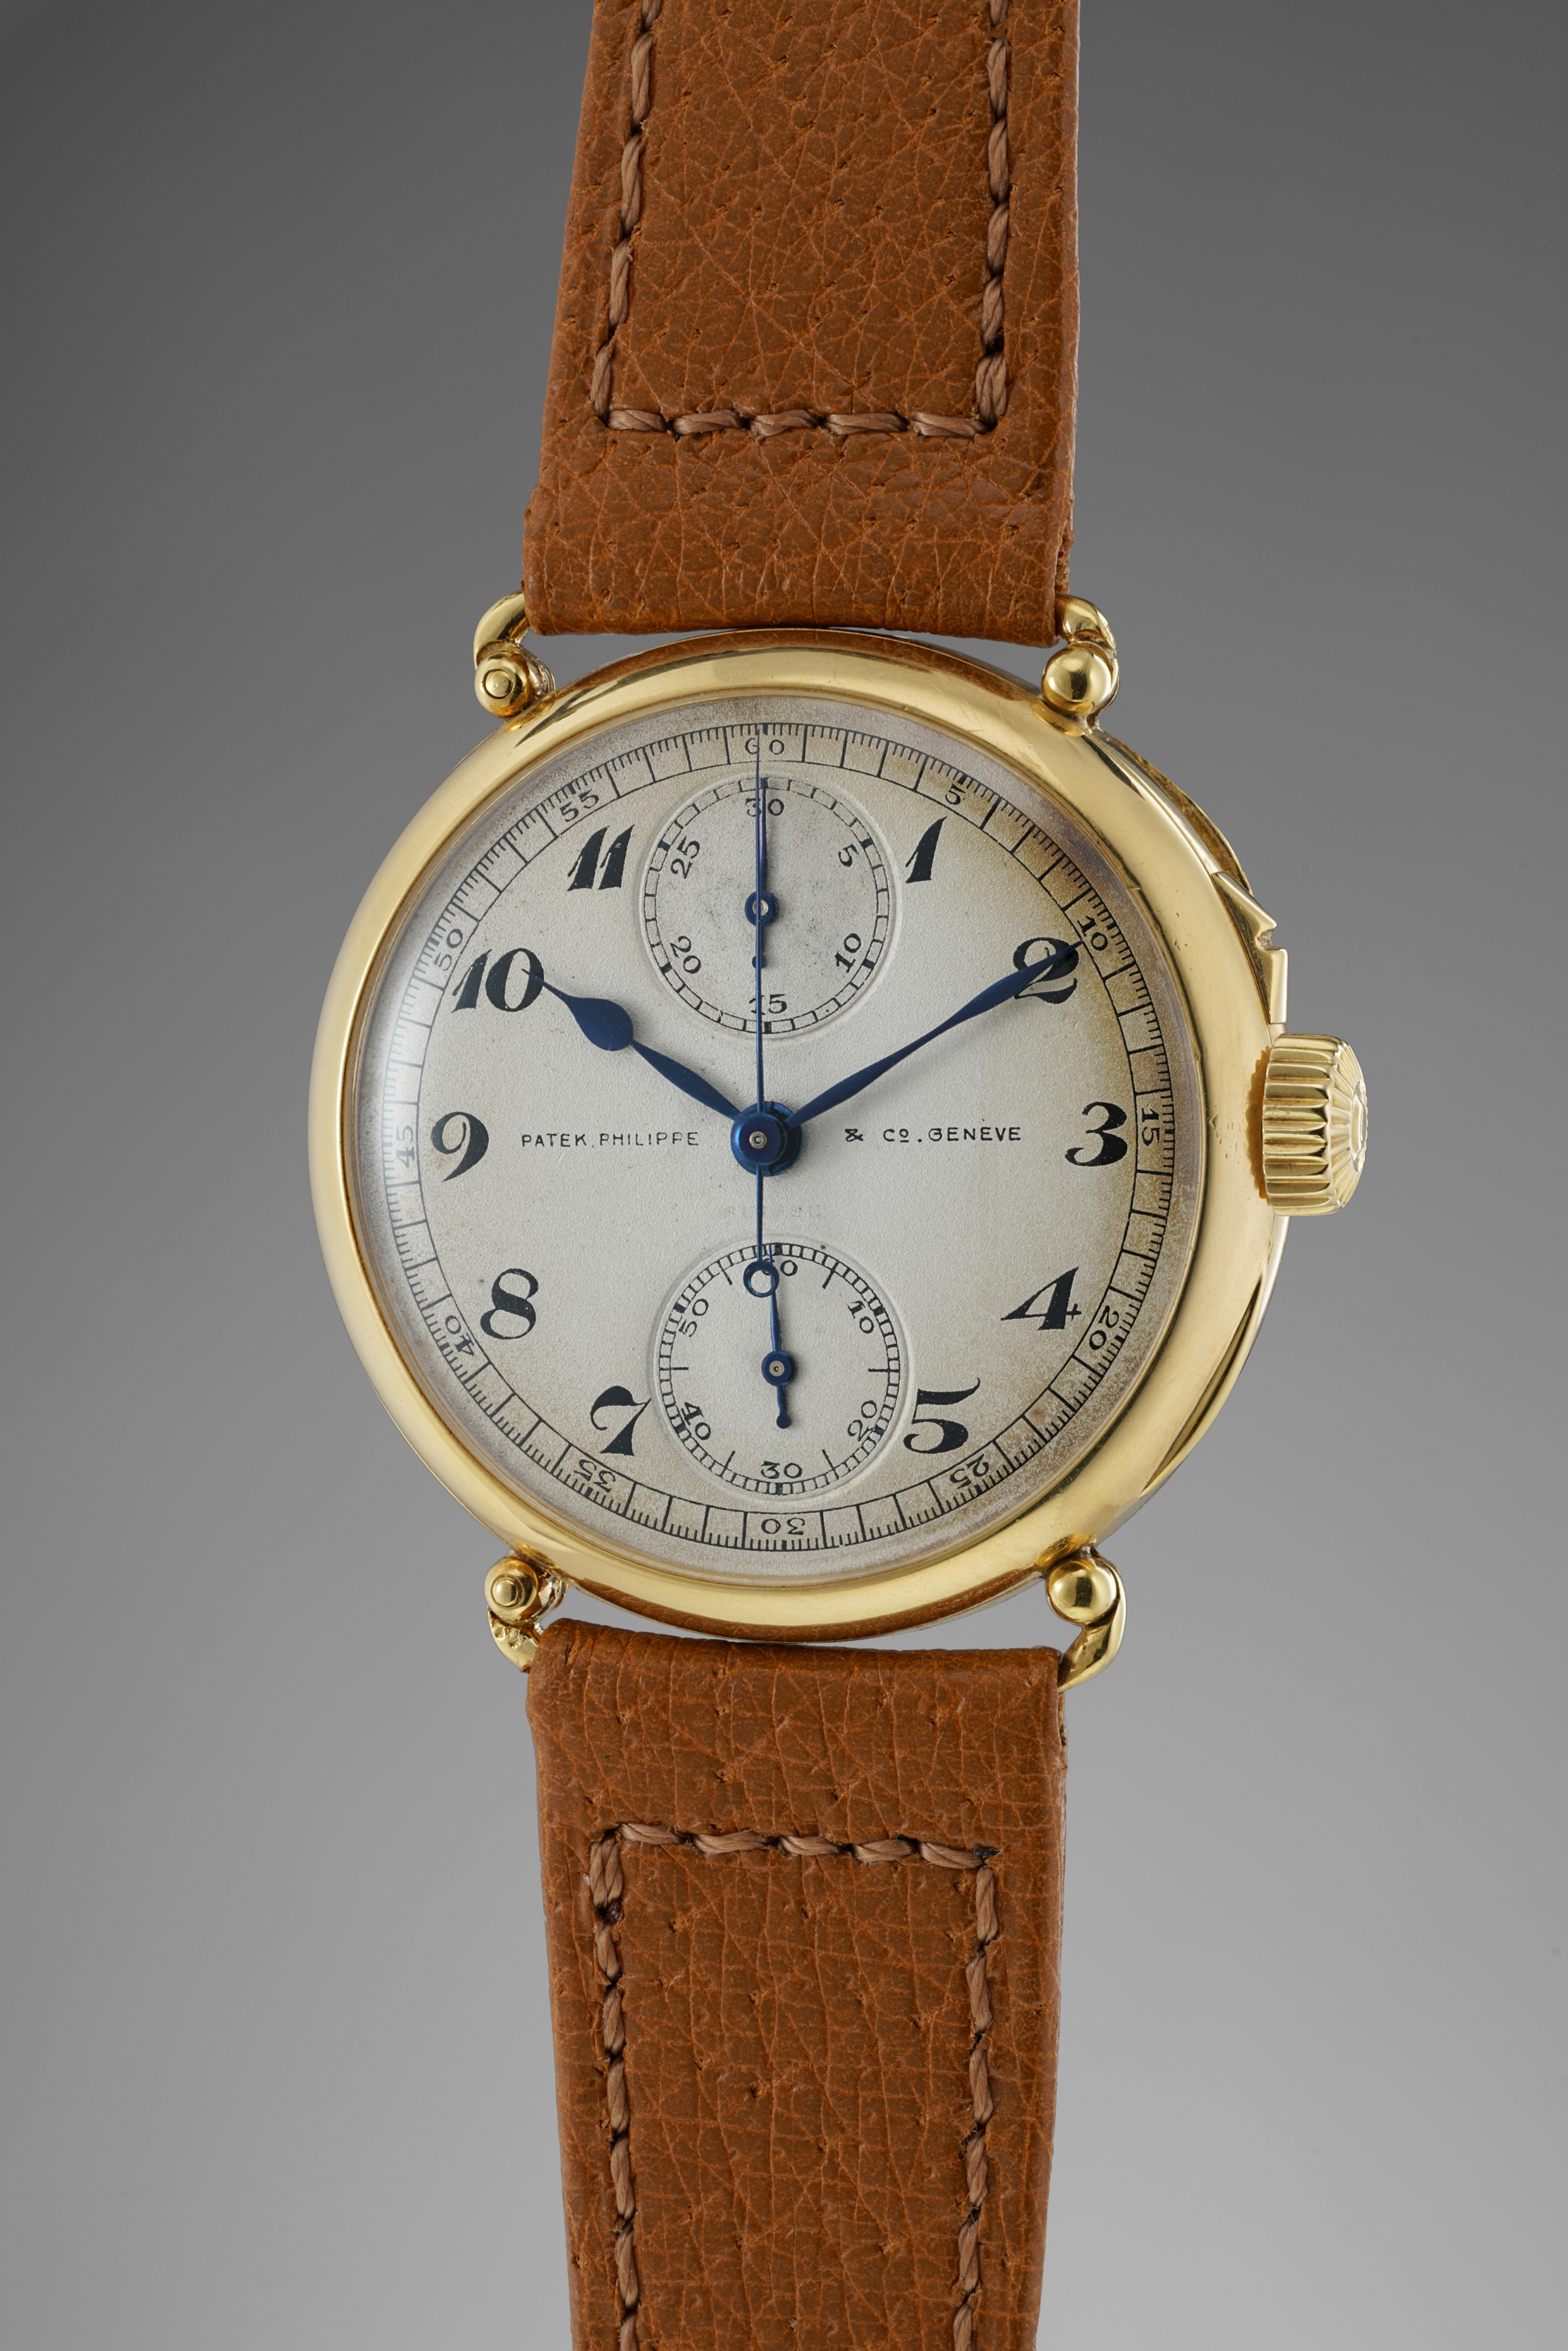 An extremely rare, well preserved and historically important yellow gold single pusher chronograph wristwatch with vertical registers and officer case.